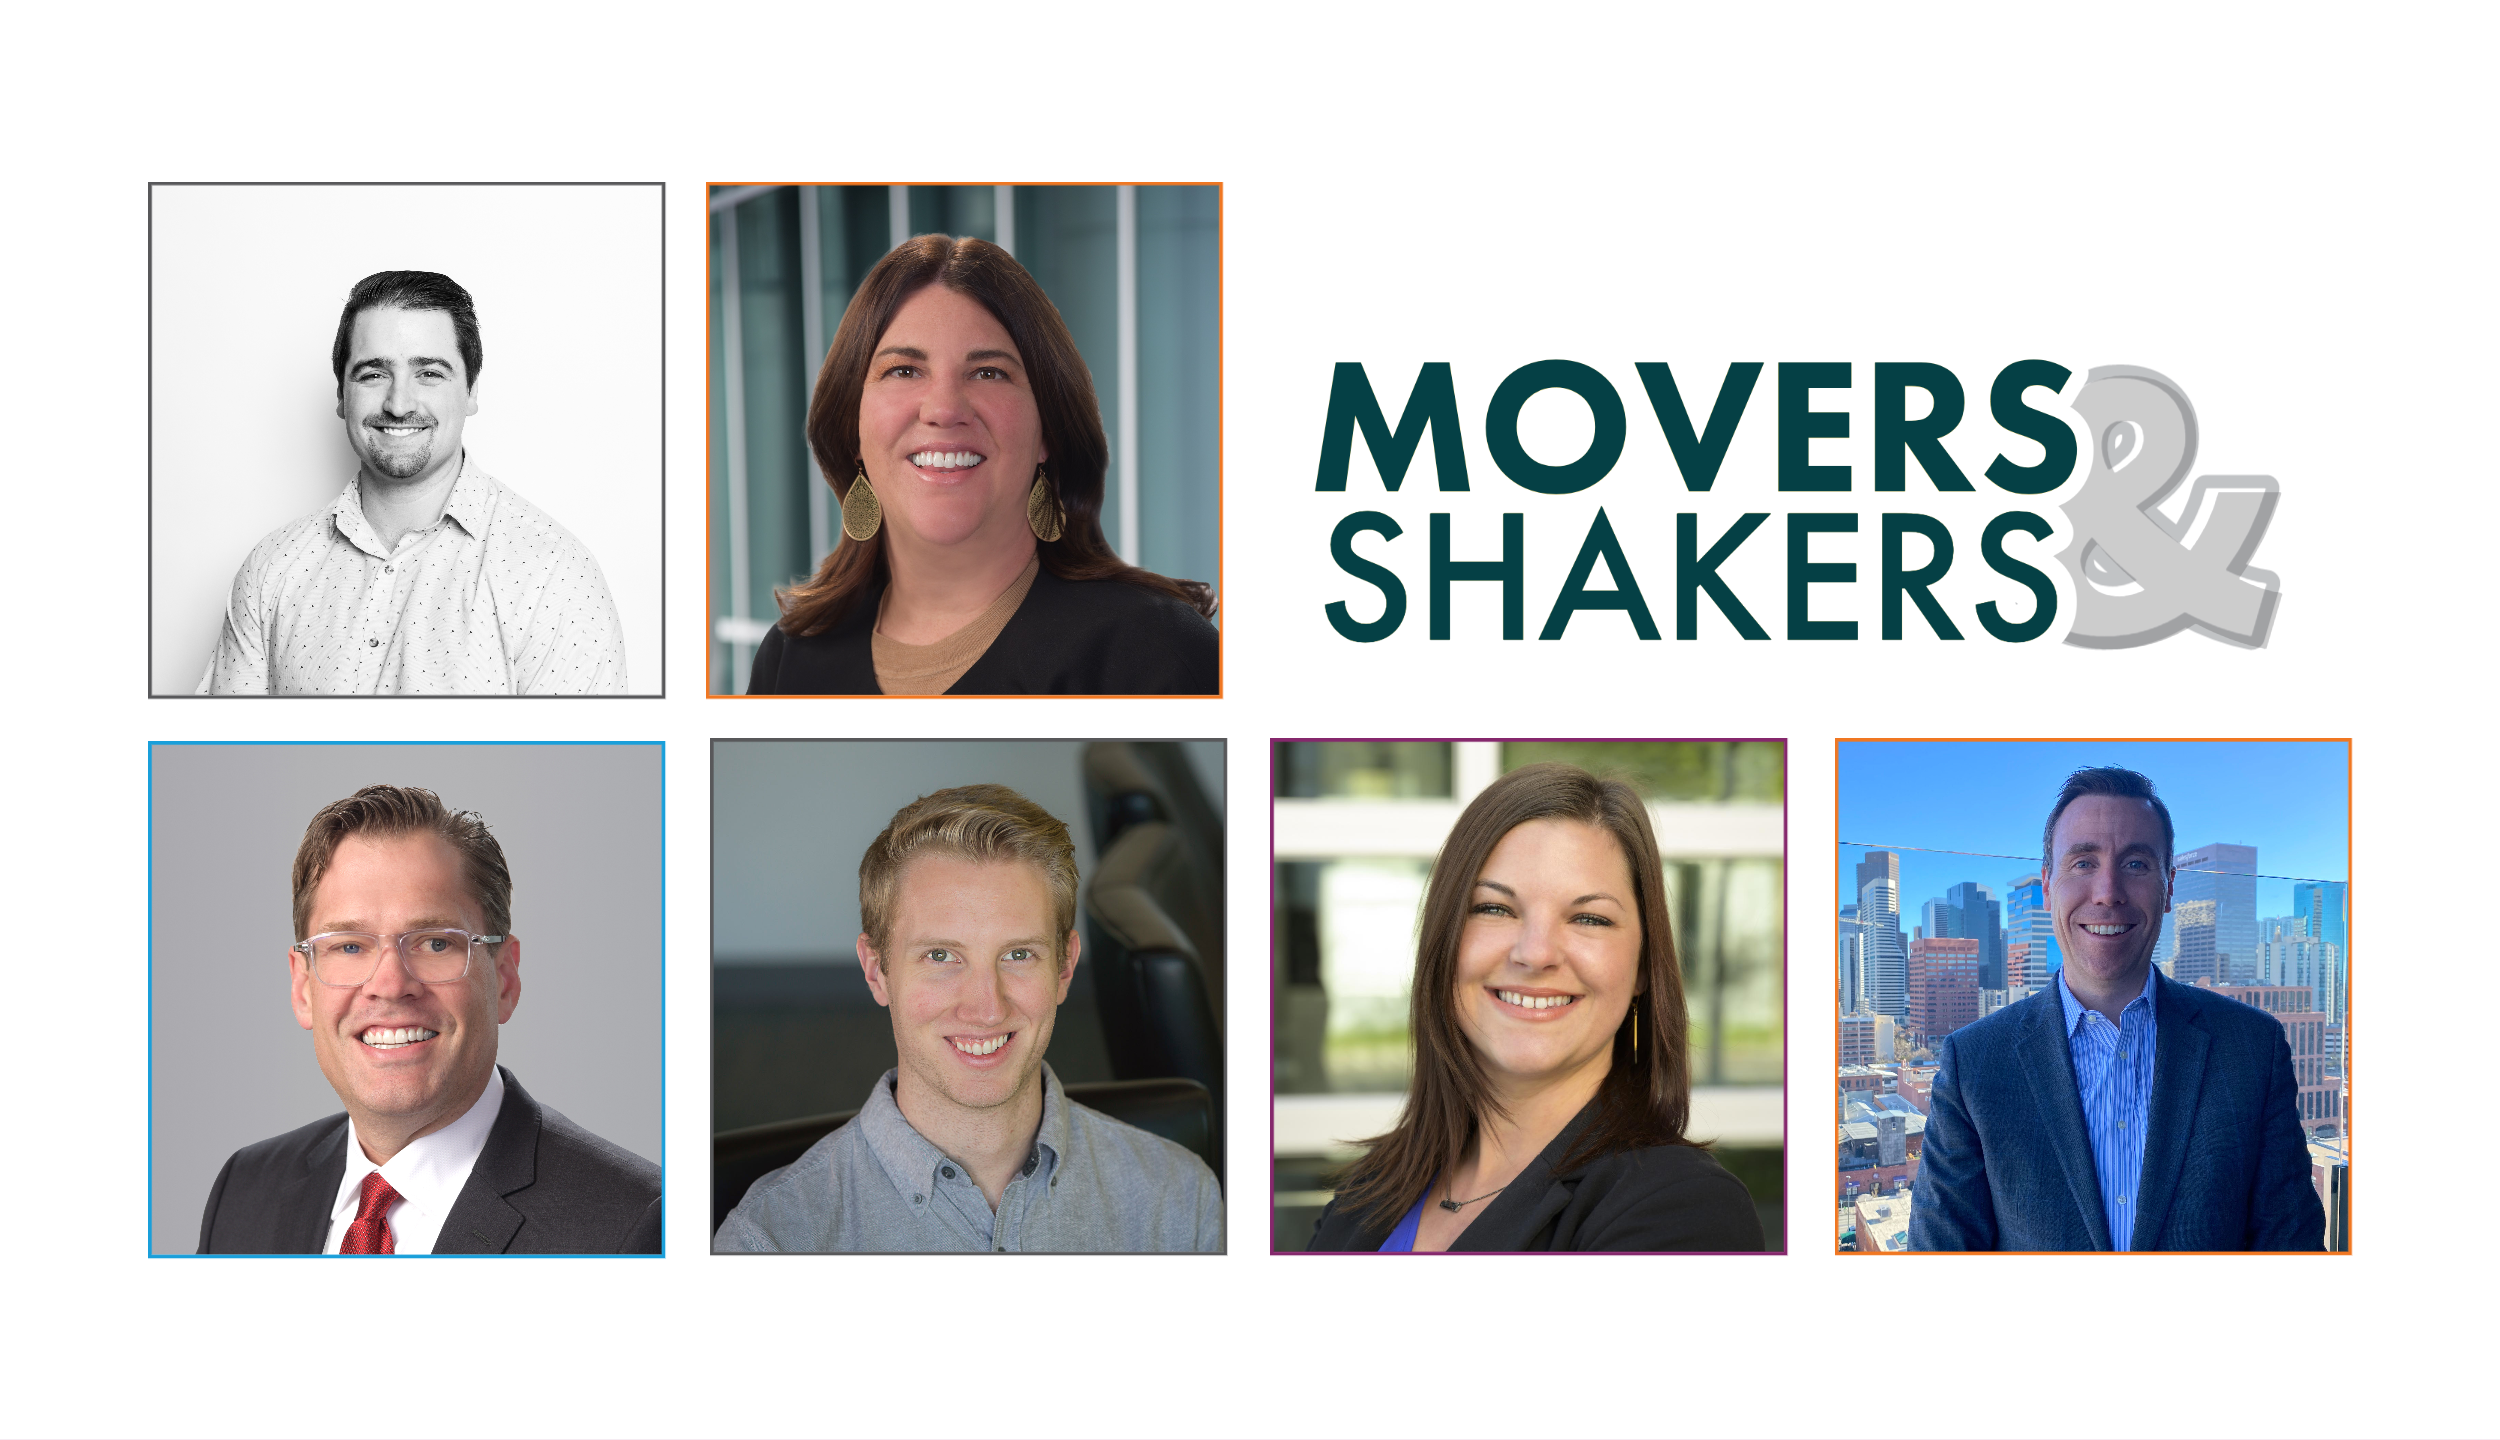 https://milehighcre.com/wp-content/uploads/2022/11/MHCRE-Movers-Shakers-Nov-17-3.png